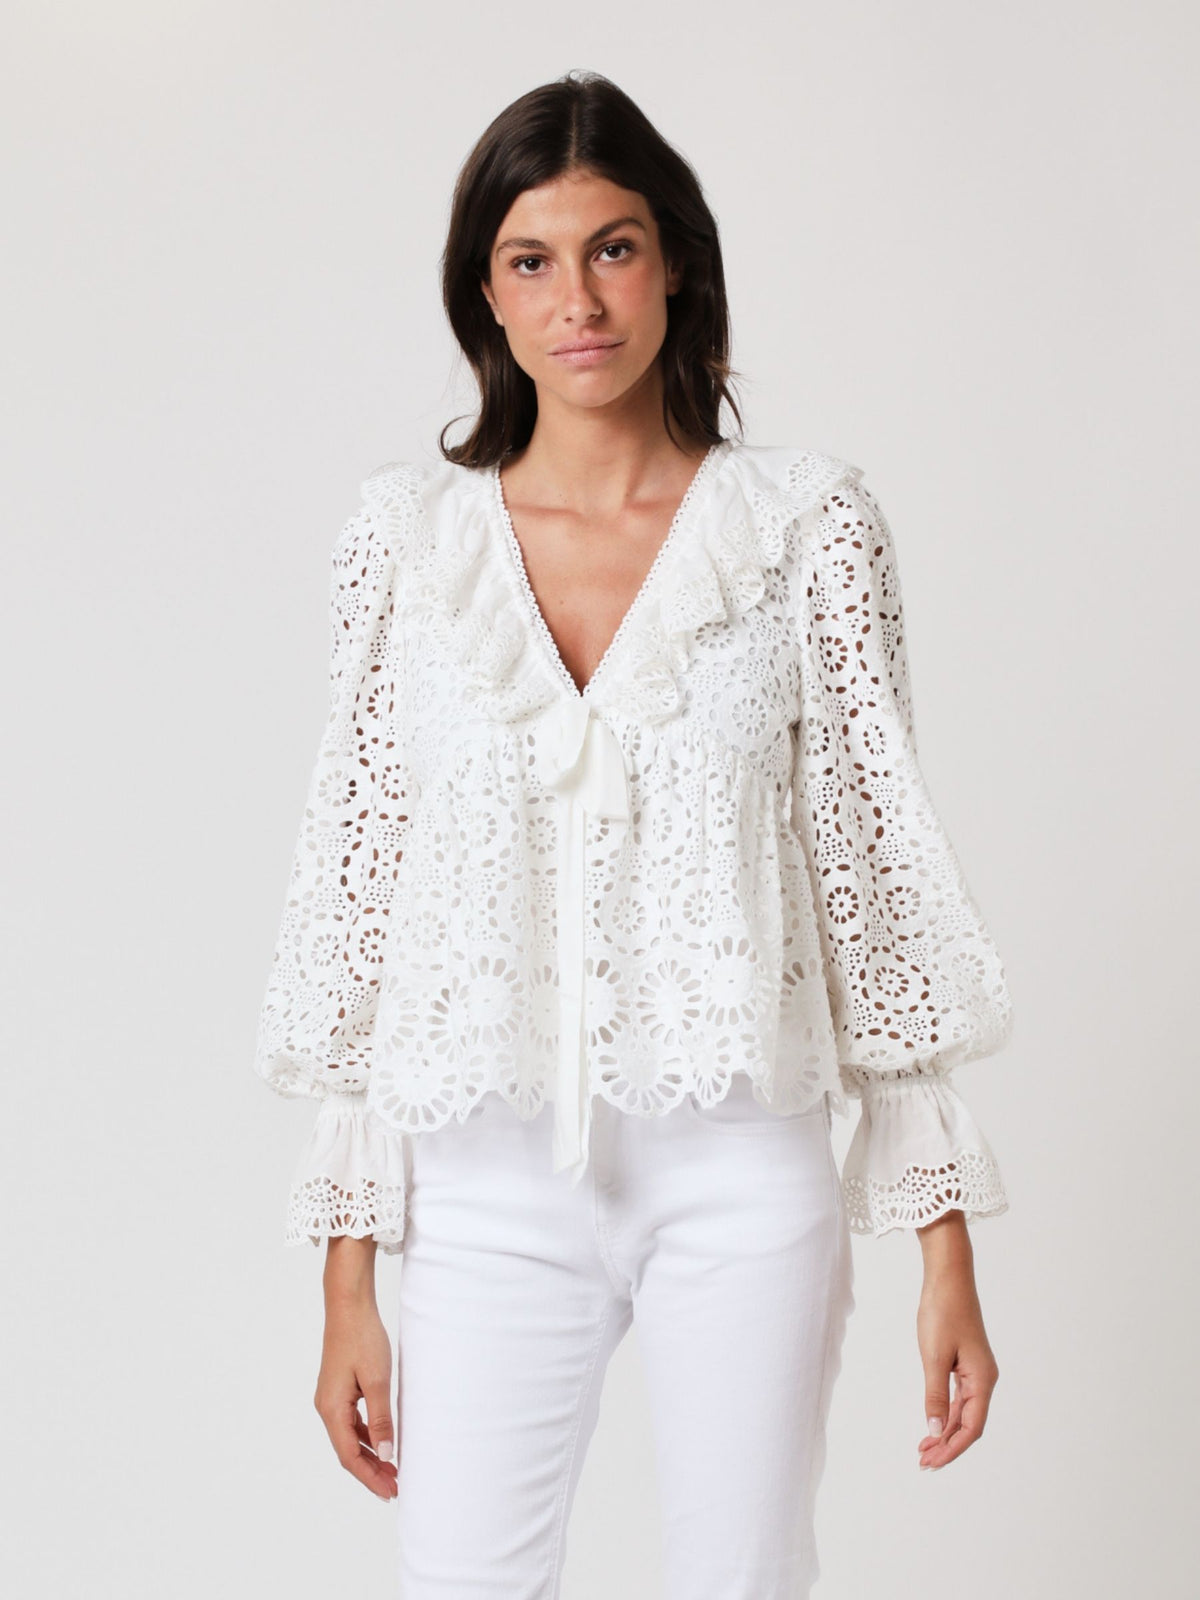 White lace top with V neck and ruffles, long sleeves with elasticated cuffs and deep frill details